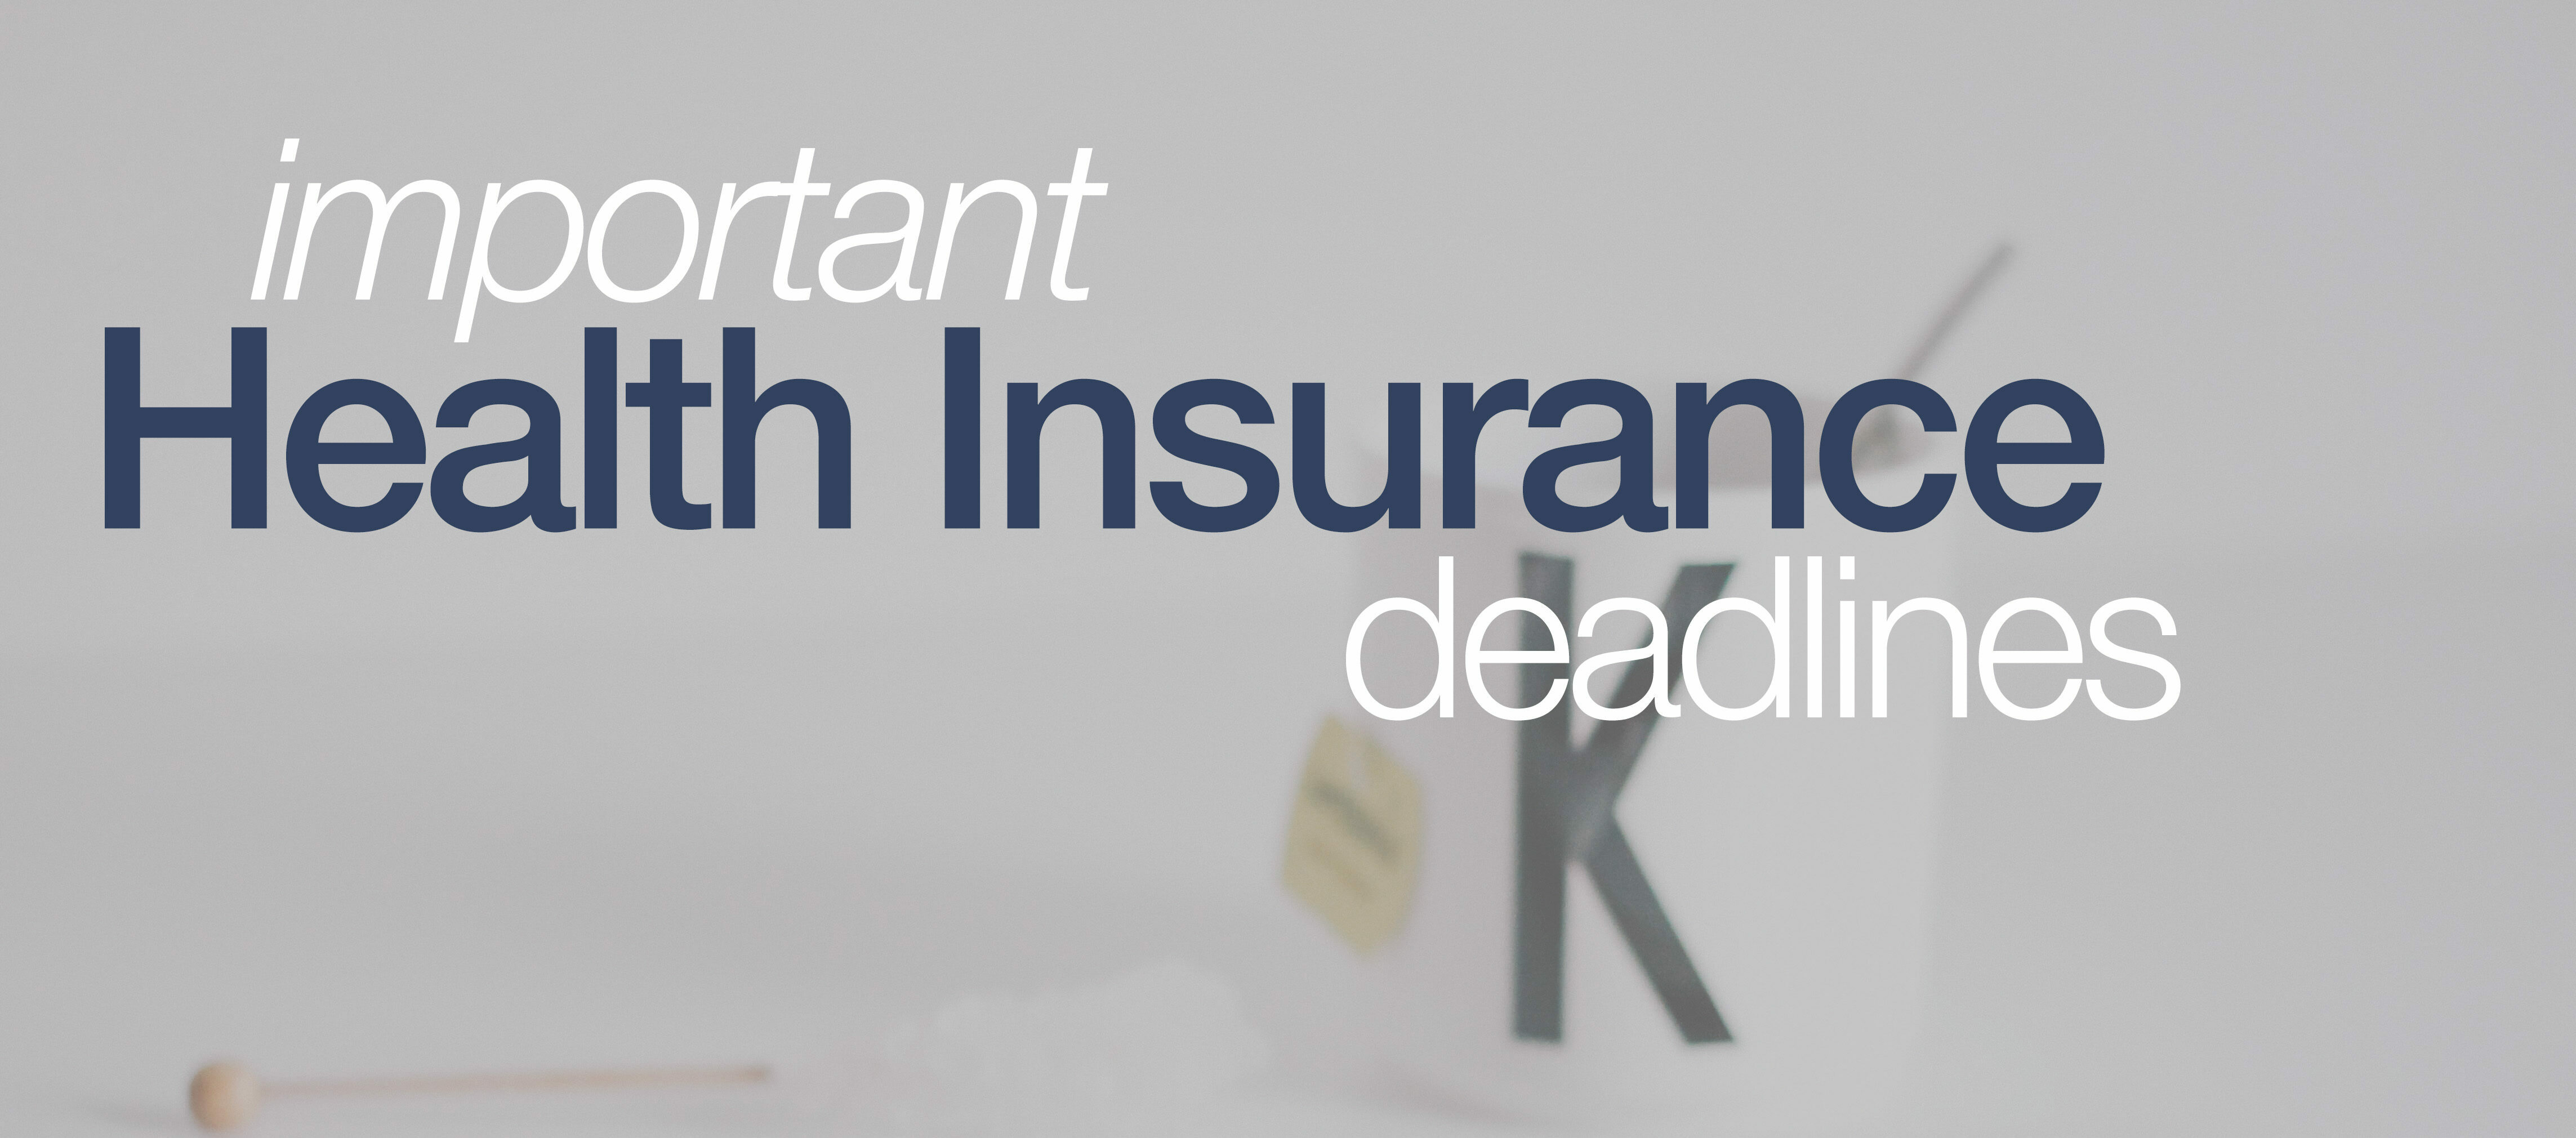 Important Health Insurance Deadlines Coming Up